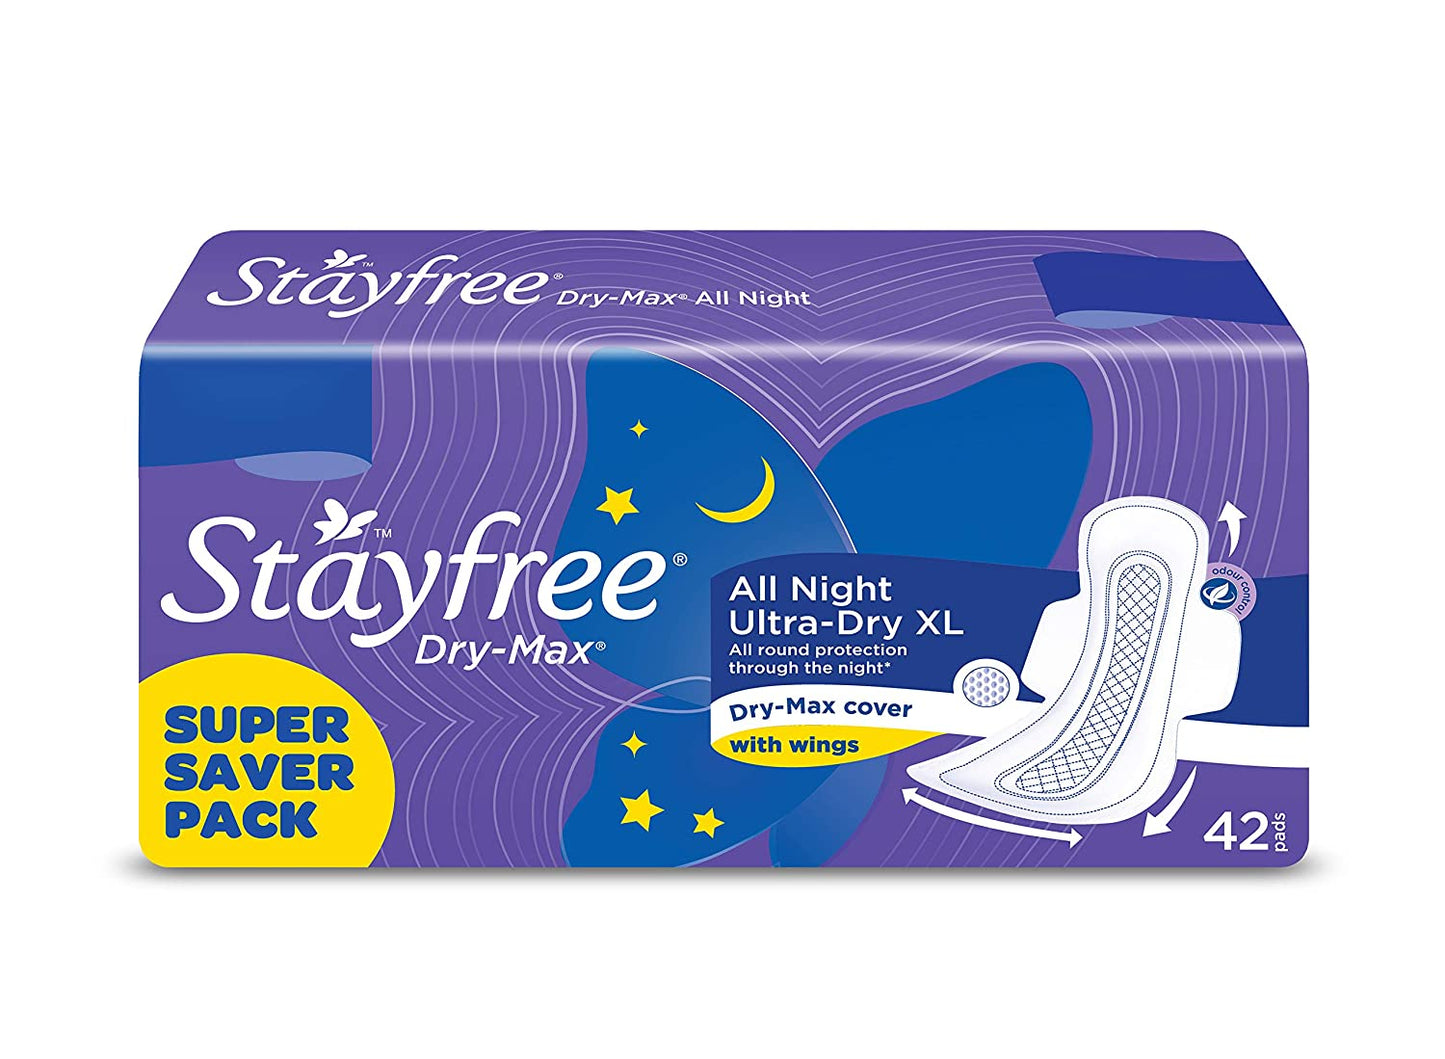 Stayfree Dry Max All Night XL Dry Cover Sanitary Pads For Women - 42 Pads